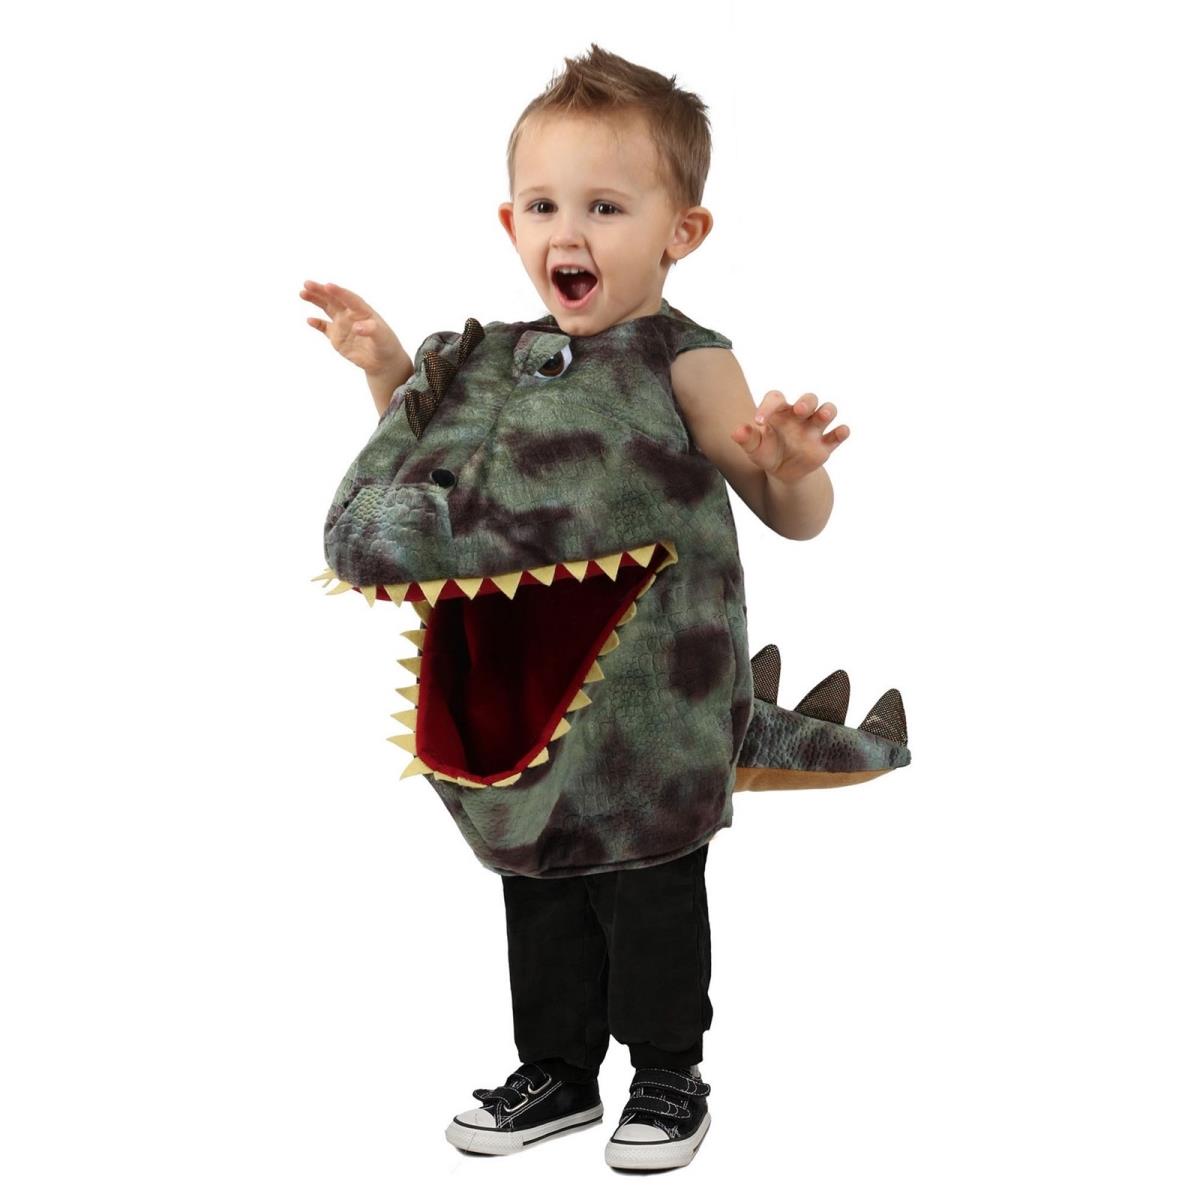 407704 Child Feed Me Dino Child Costume - Extra Small & Small